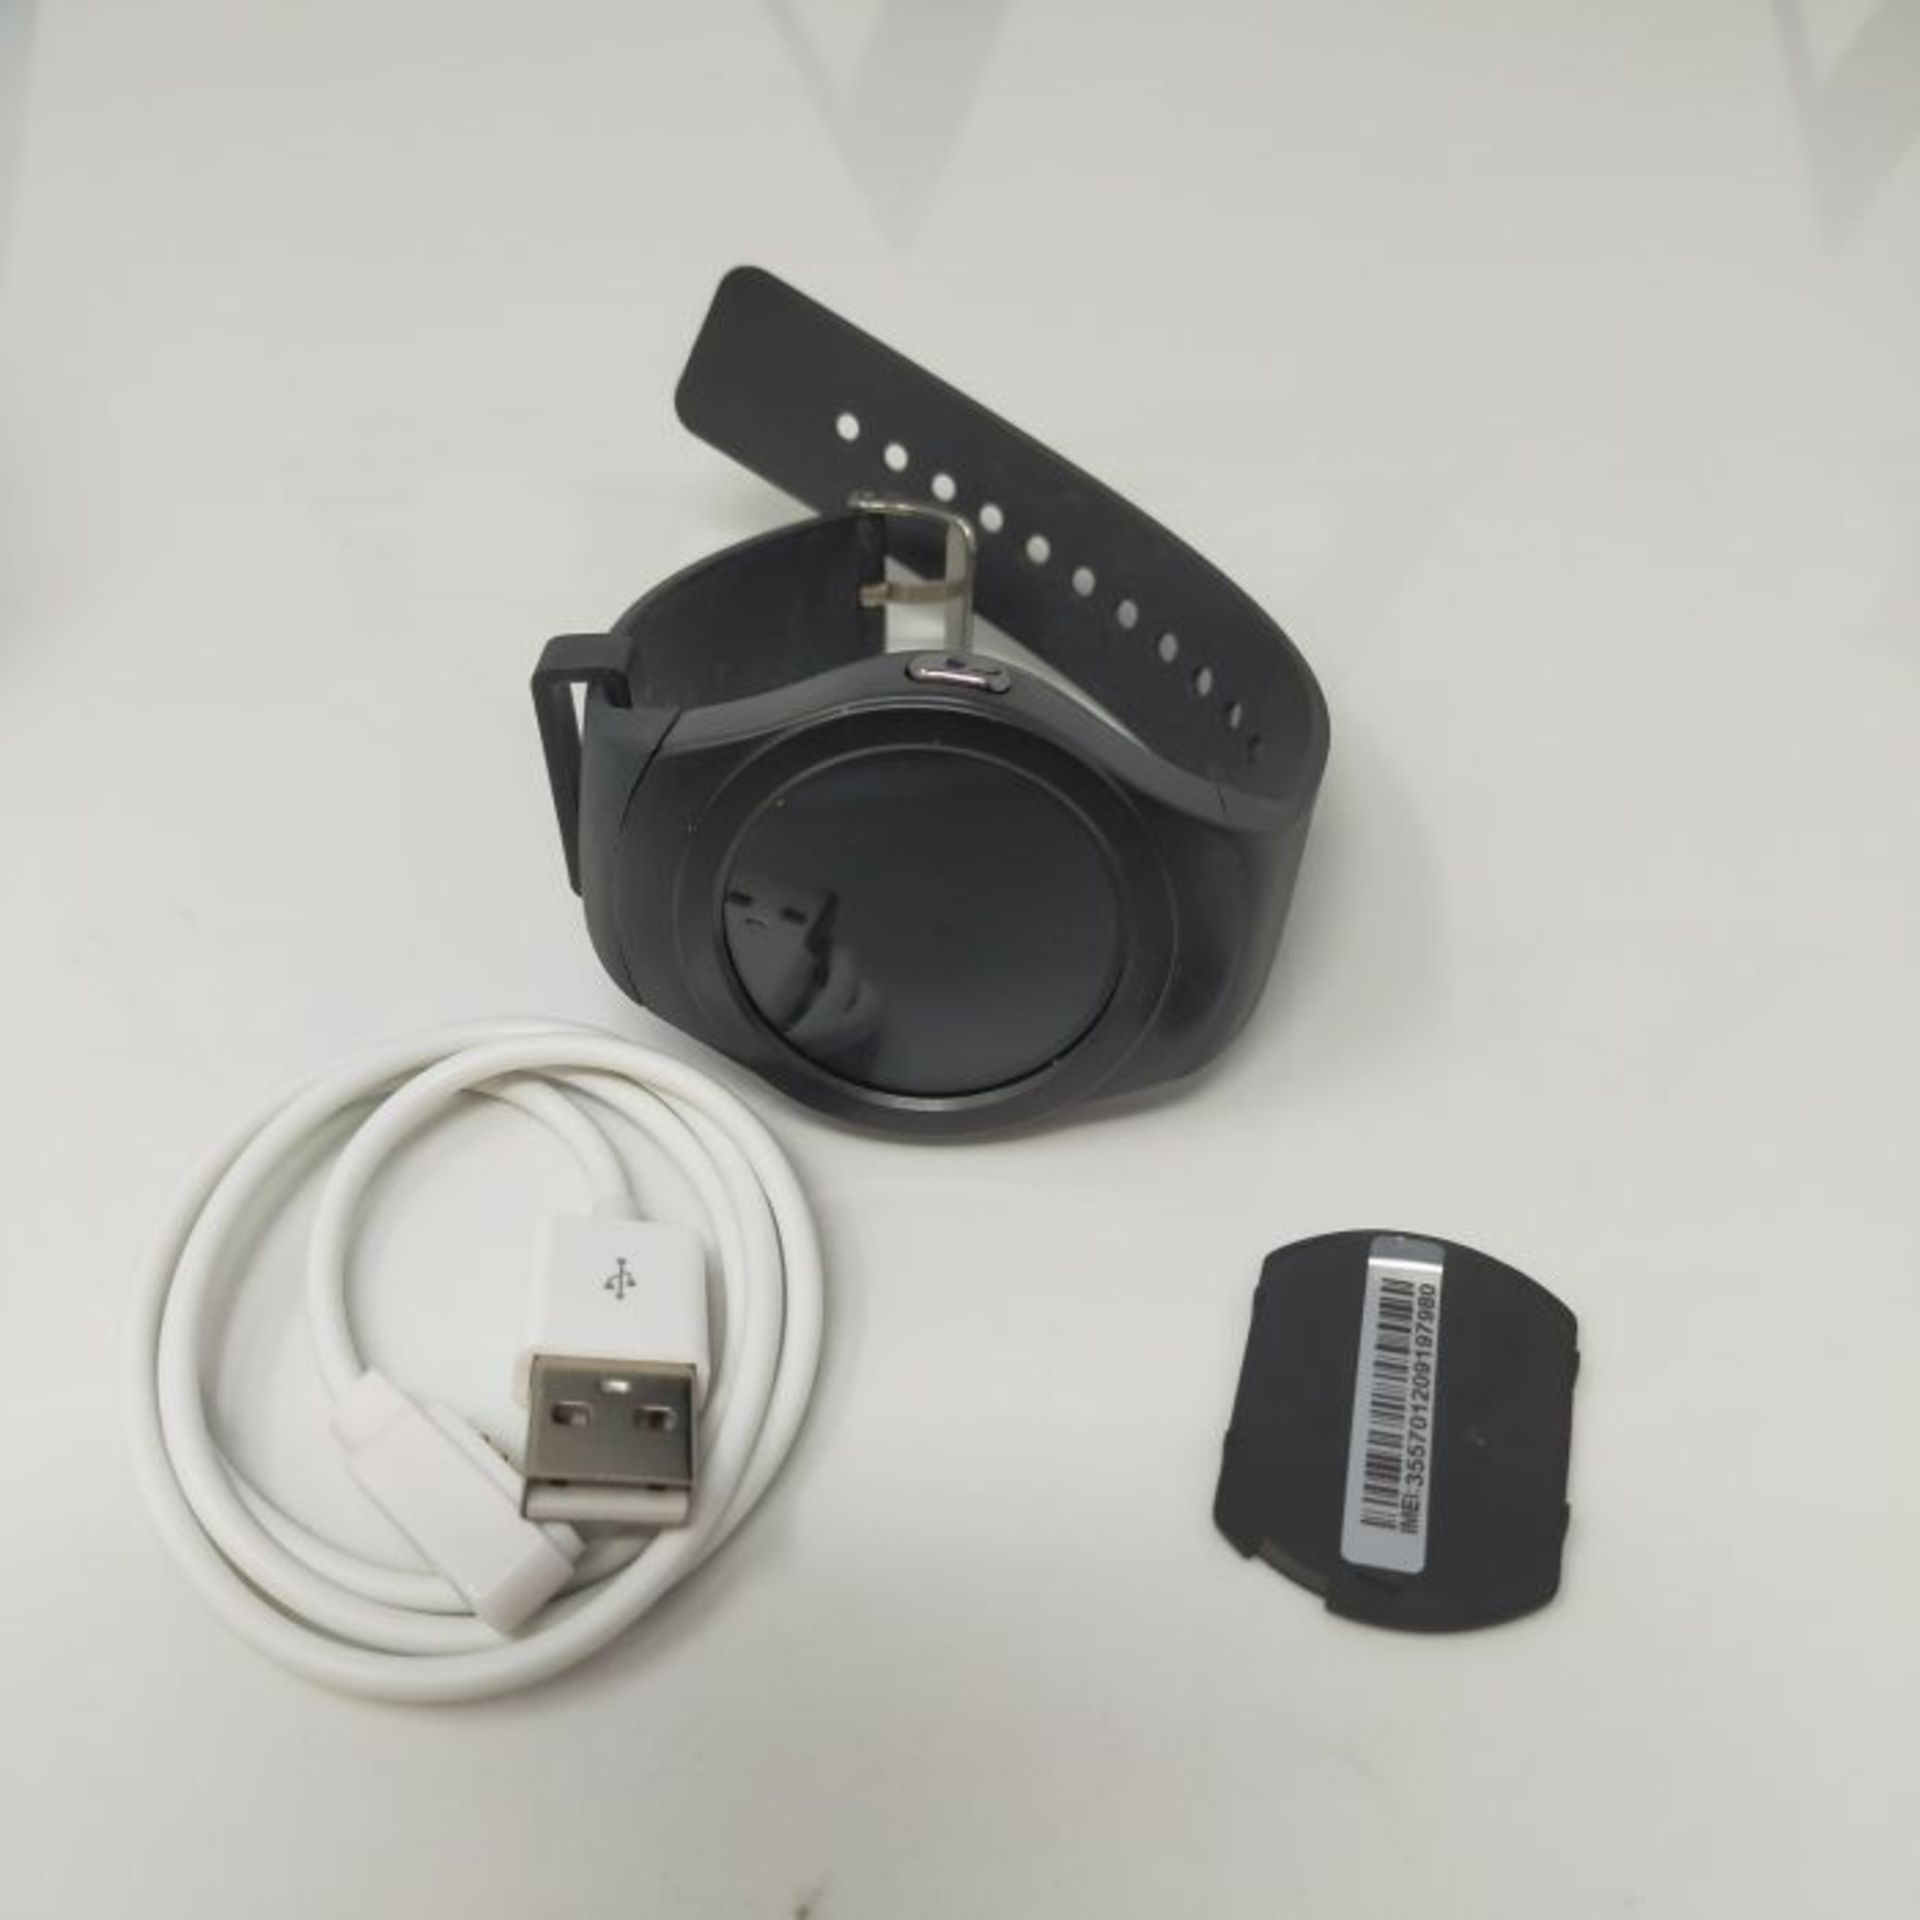 [INCOMPLETE] Prixton smartwatch sw22? - Image 3 of 3